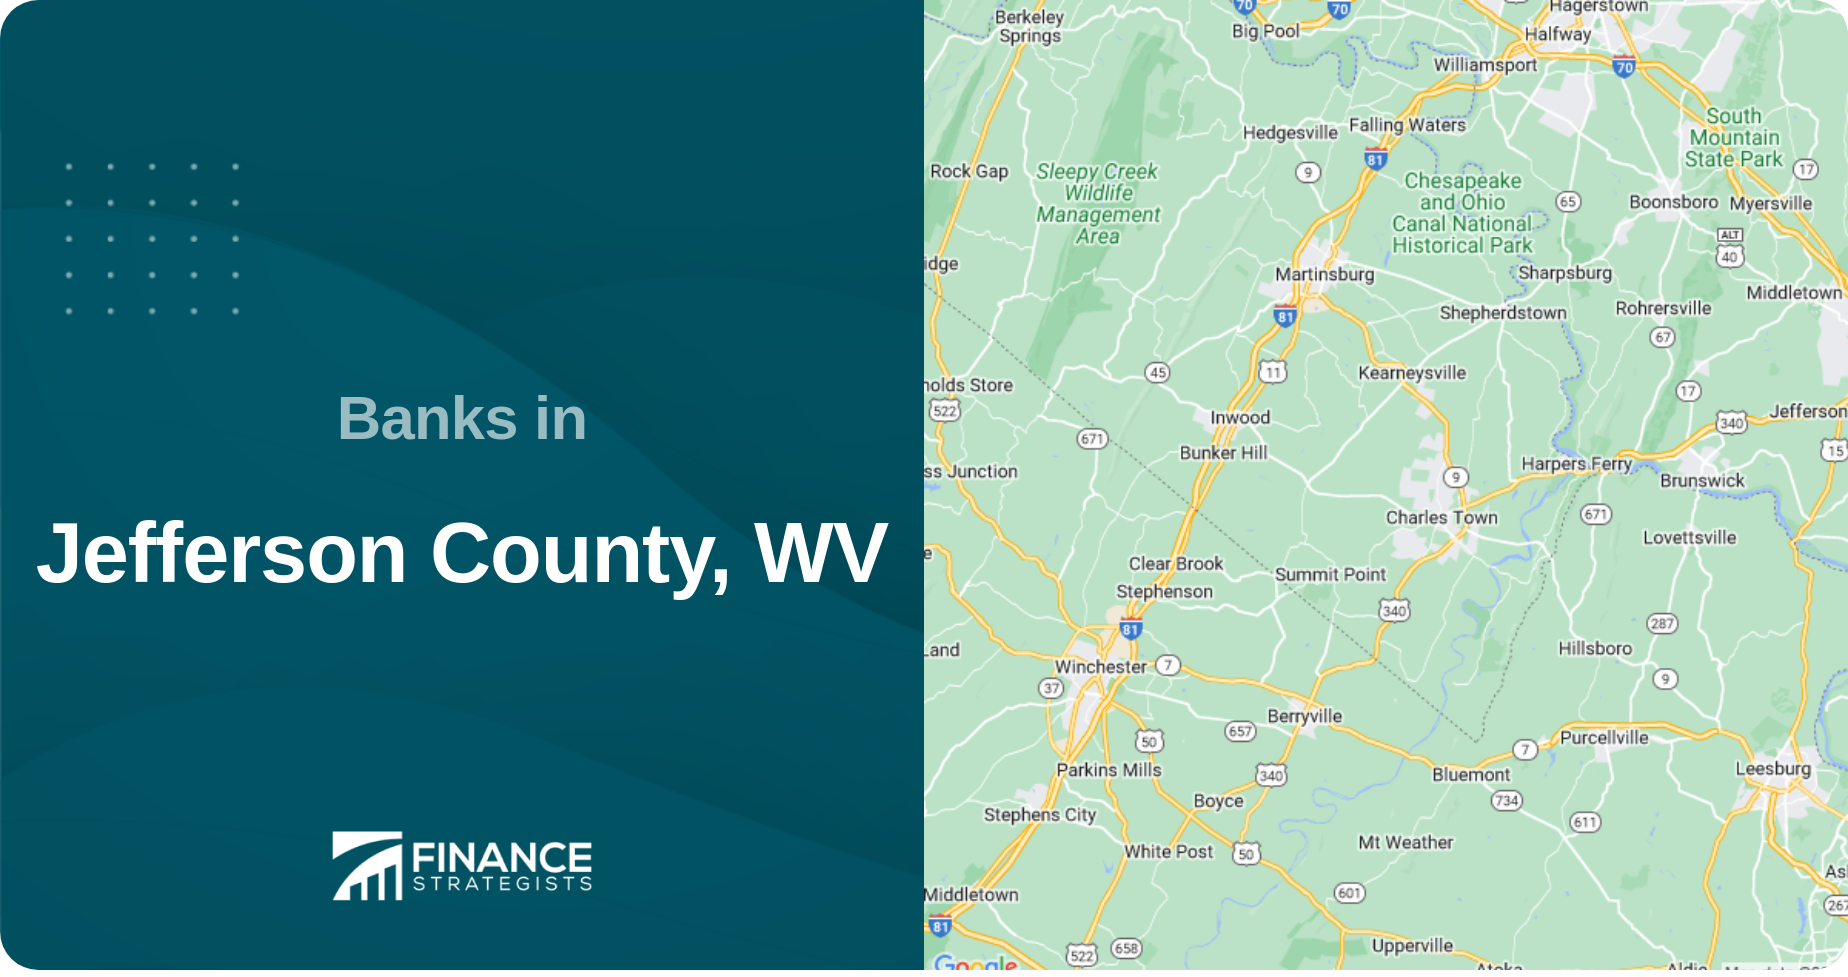 Banks in Jefferson County, WV